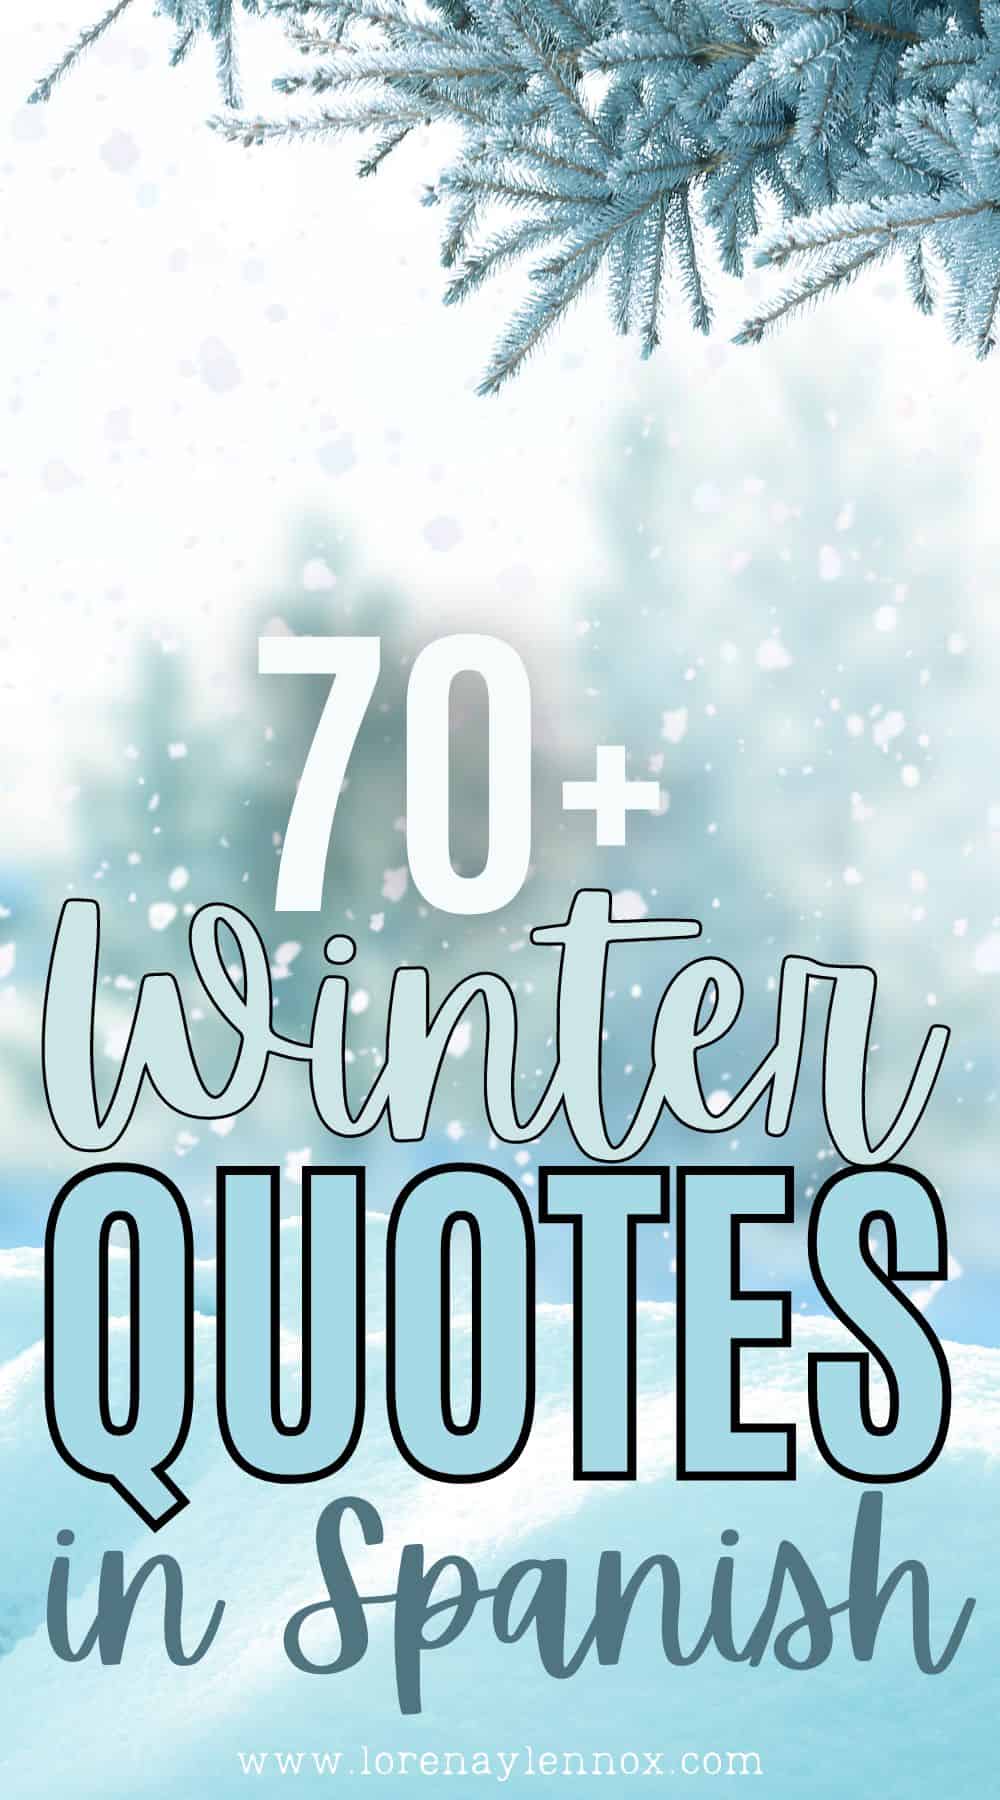 Embrace the magic of winter with these 50 enchanting quotes in both Spanish and English. Let the beauty of snowflakes, the warmth of cozy moments, and the serenity of the season fill your heart with inspiration. Explore the essence of winter as it invites you to slow down, reflect, and cherish the simple joys. Pin these quotes to your board and capture the wonder of the cold season. #WinterQuotes #Snowfall #CozyMoments